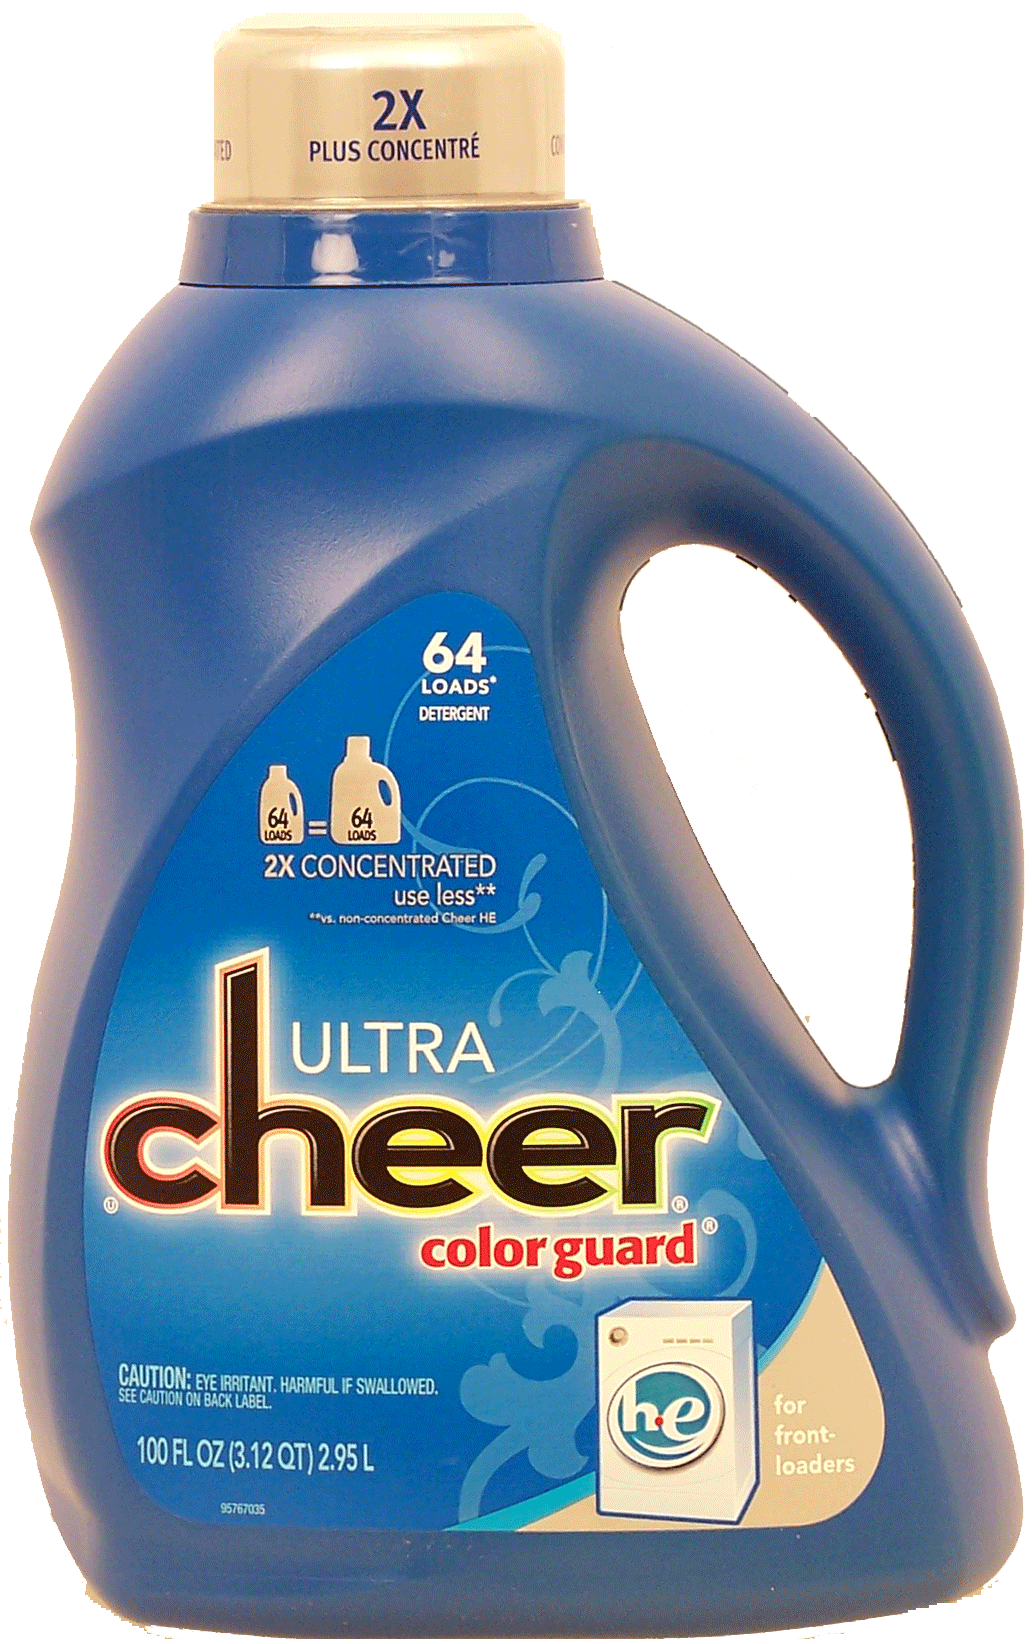 Cheer Ultra 2x concentrated colorguard detergent for high efficiency front-loaders, 64 loads, Full-Size Picture